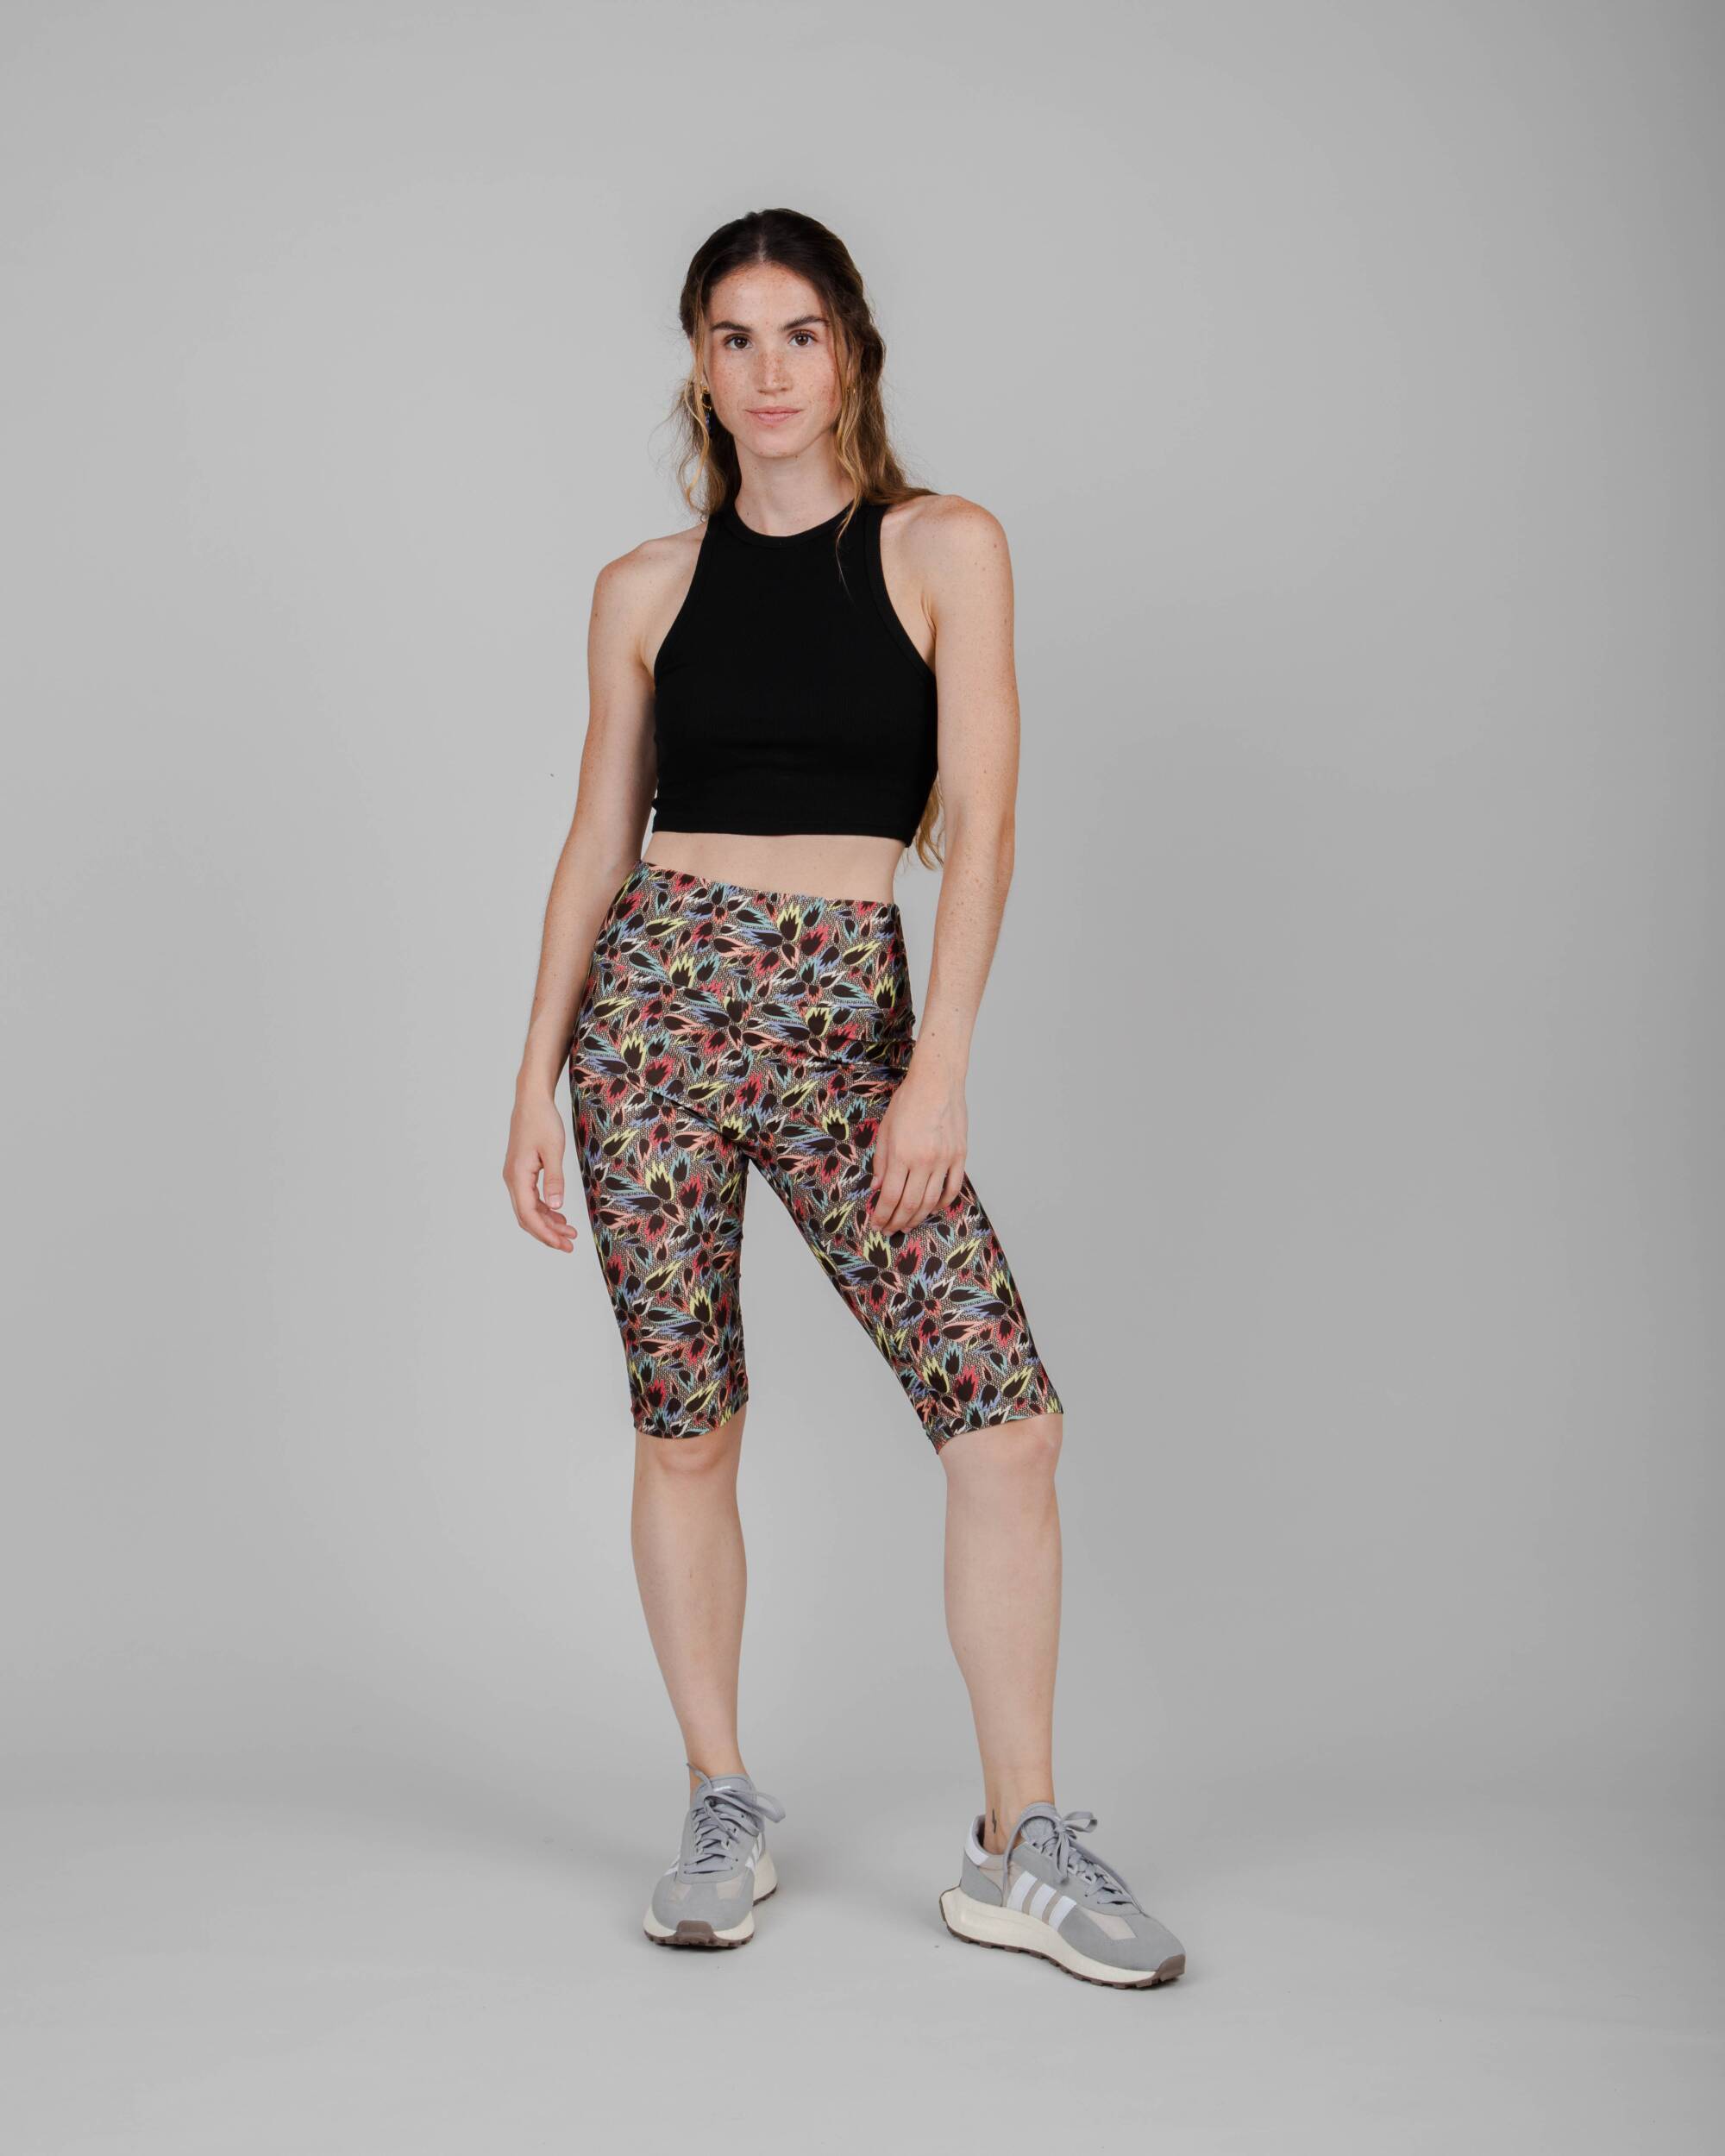 Colorful leggings Peseta Flames 3/4 made from recycled polyester and recycled elastane from Brava Fabrics